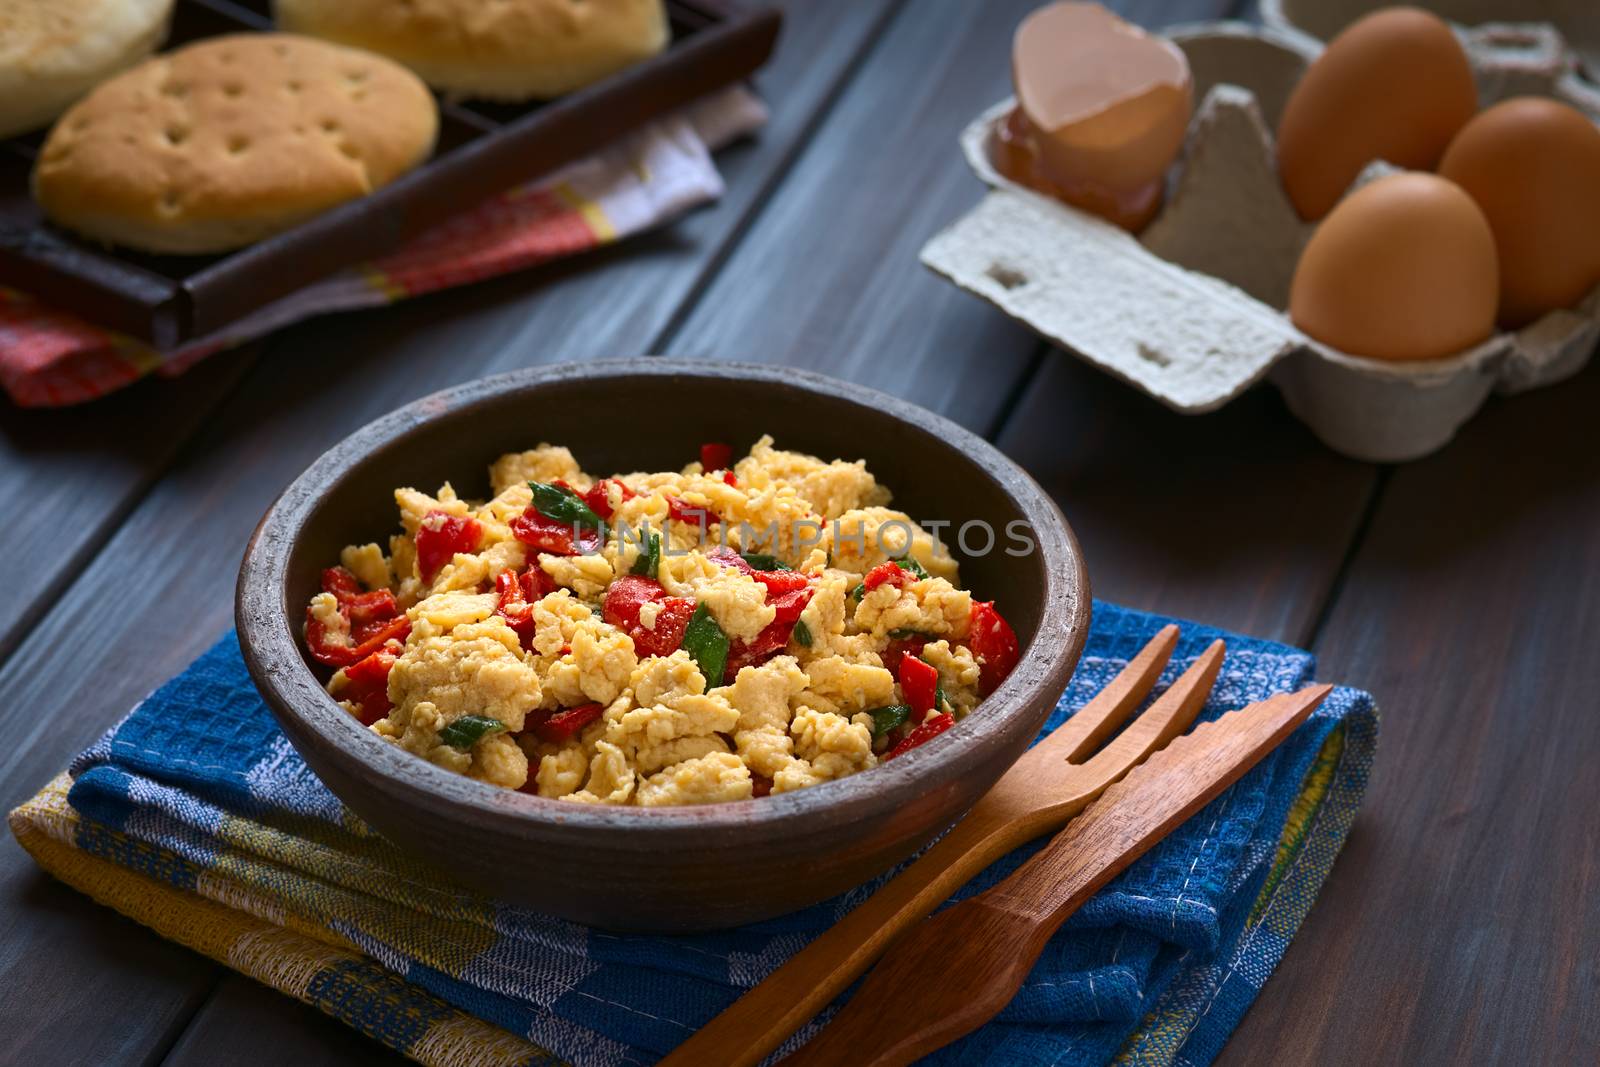 Scrambled Eggs with Red Pepper and Green Onion by ildi